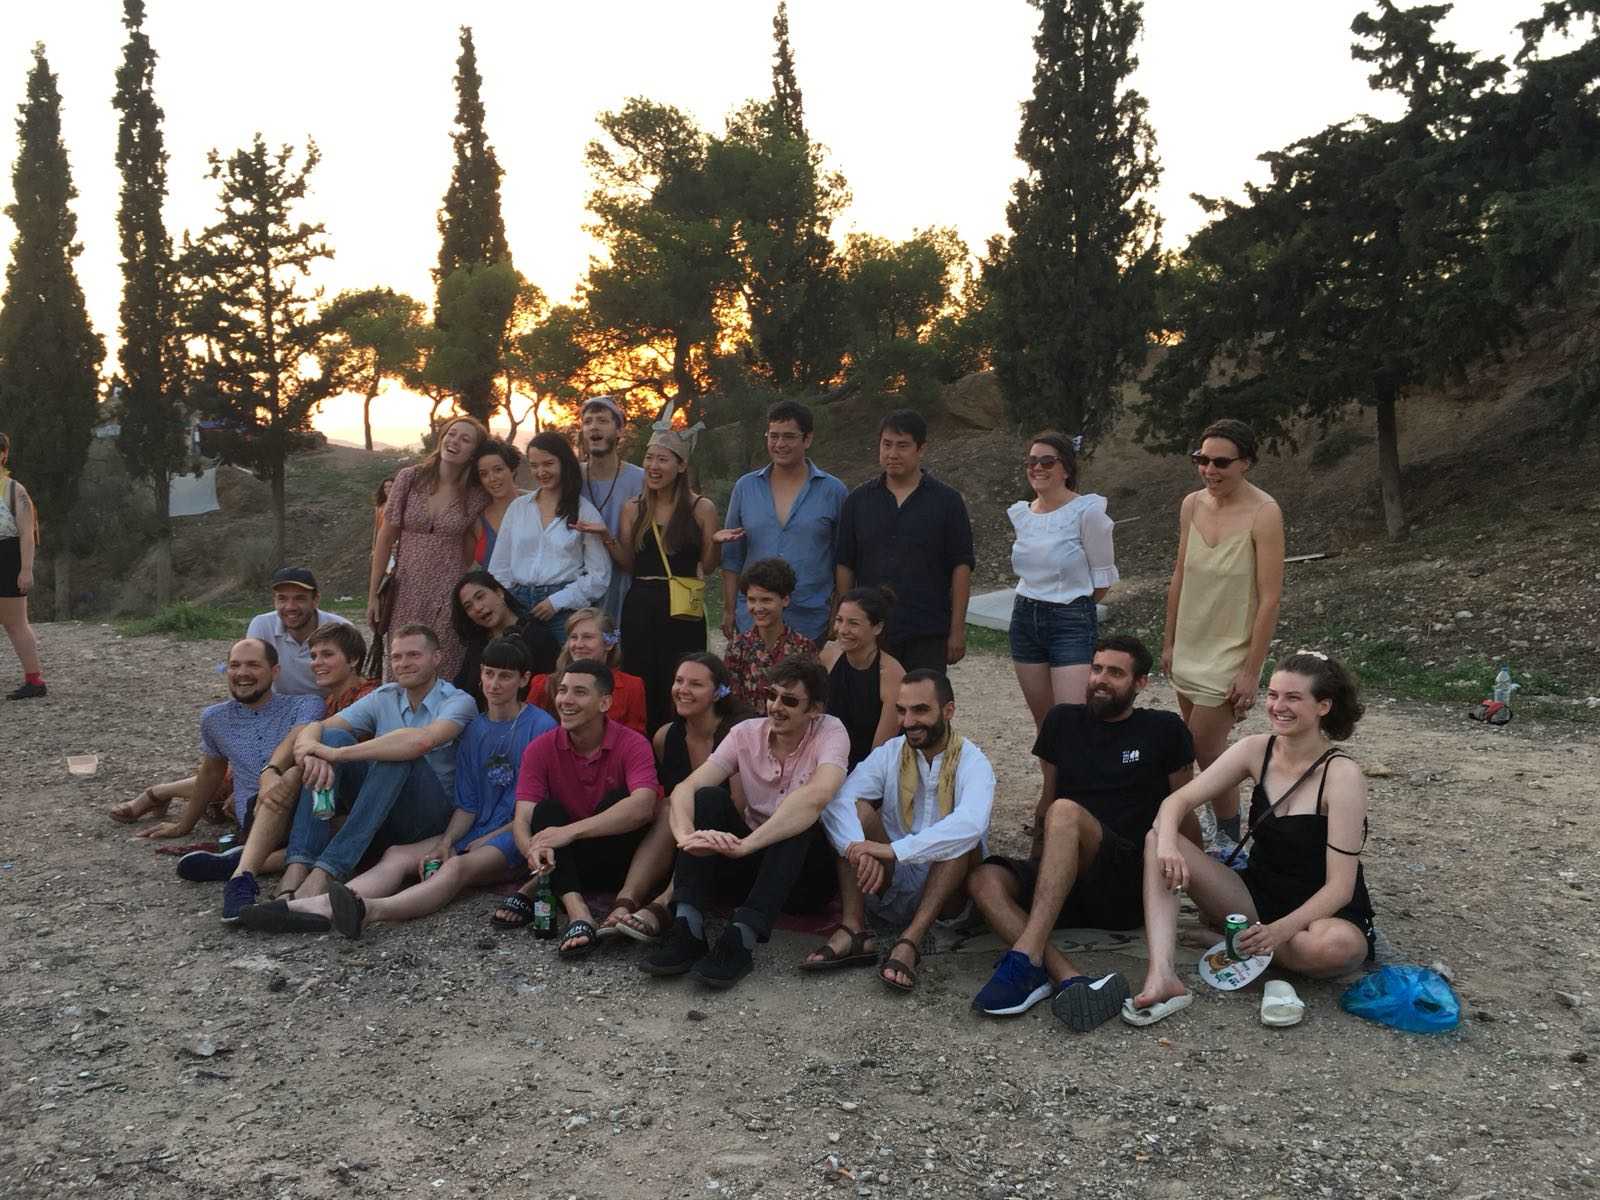 The 2016-2018 class of the Dutch Art Institute a.k.a. DAI during our farewell ceremony @ Strefi Hill in Athens, July 2018. ( Image credit: Ciarán Wood)